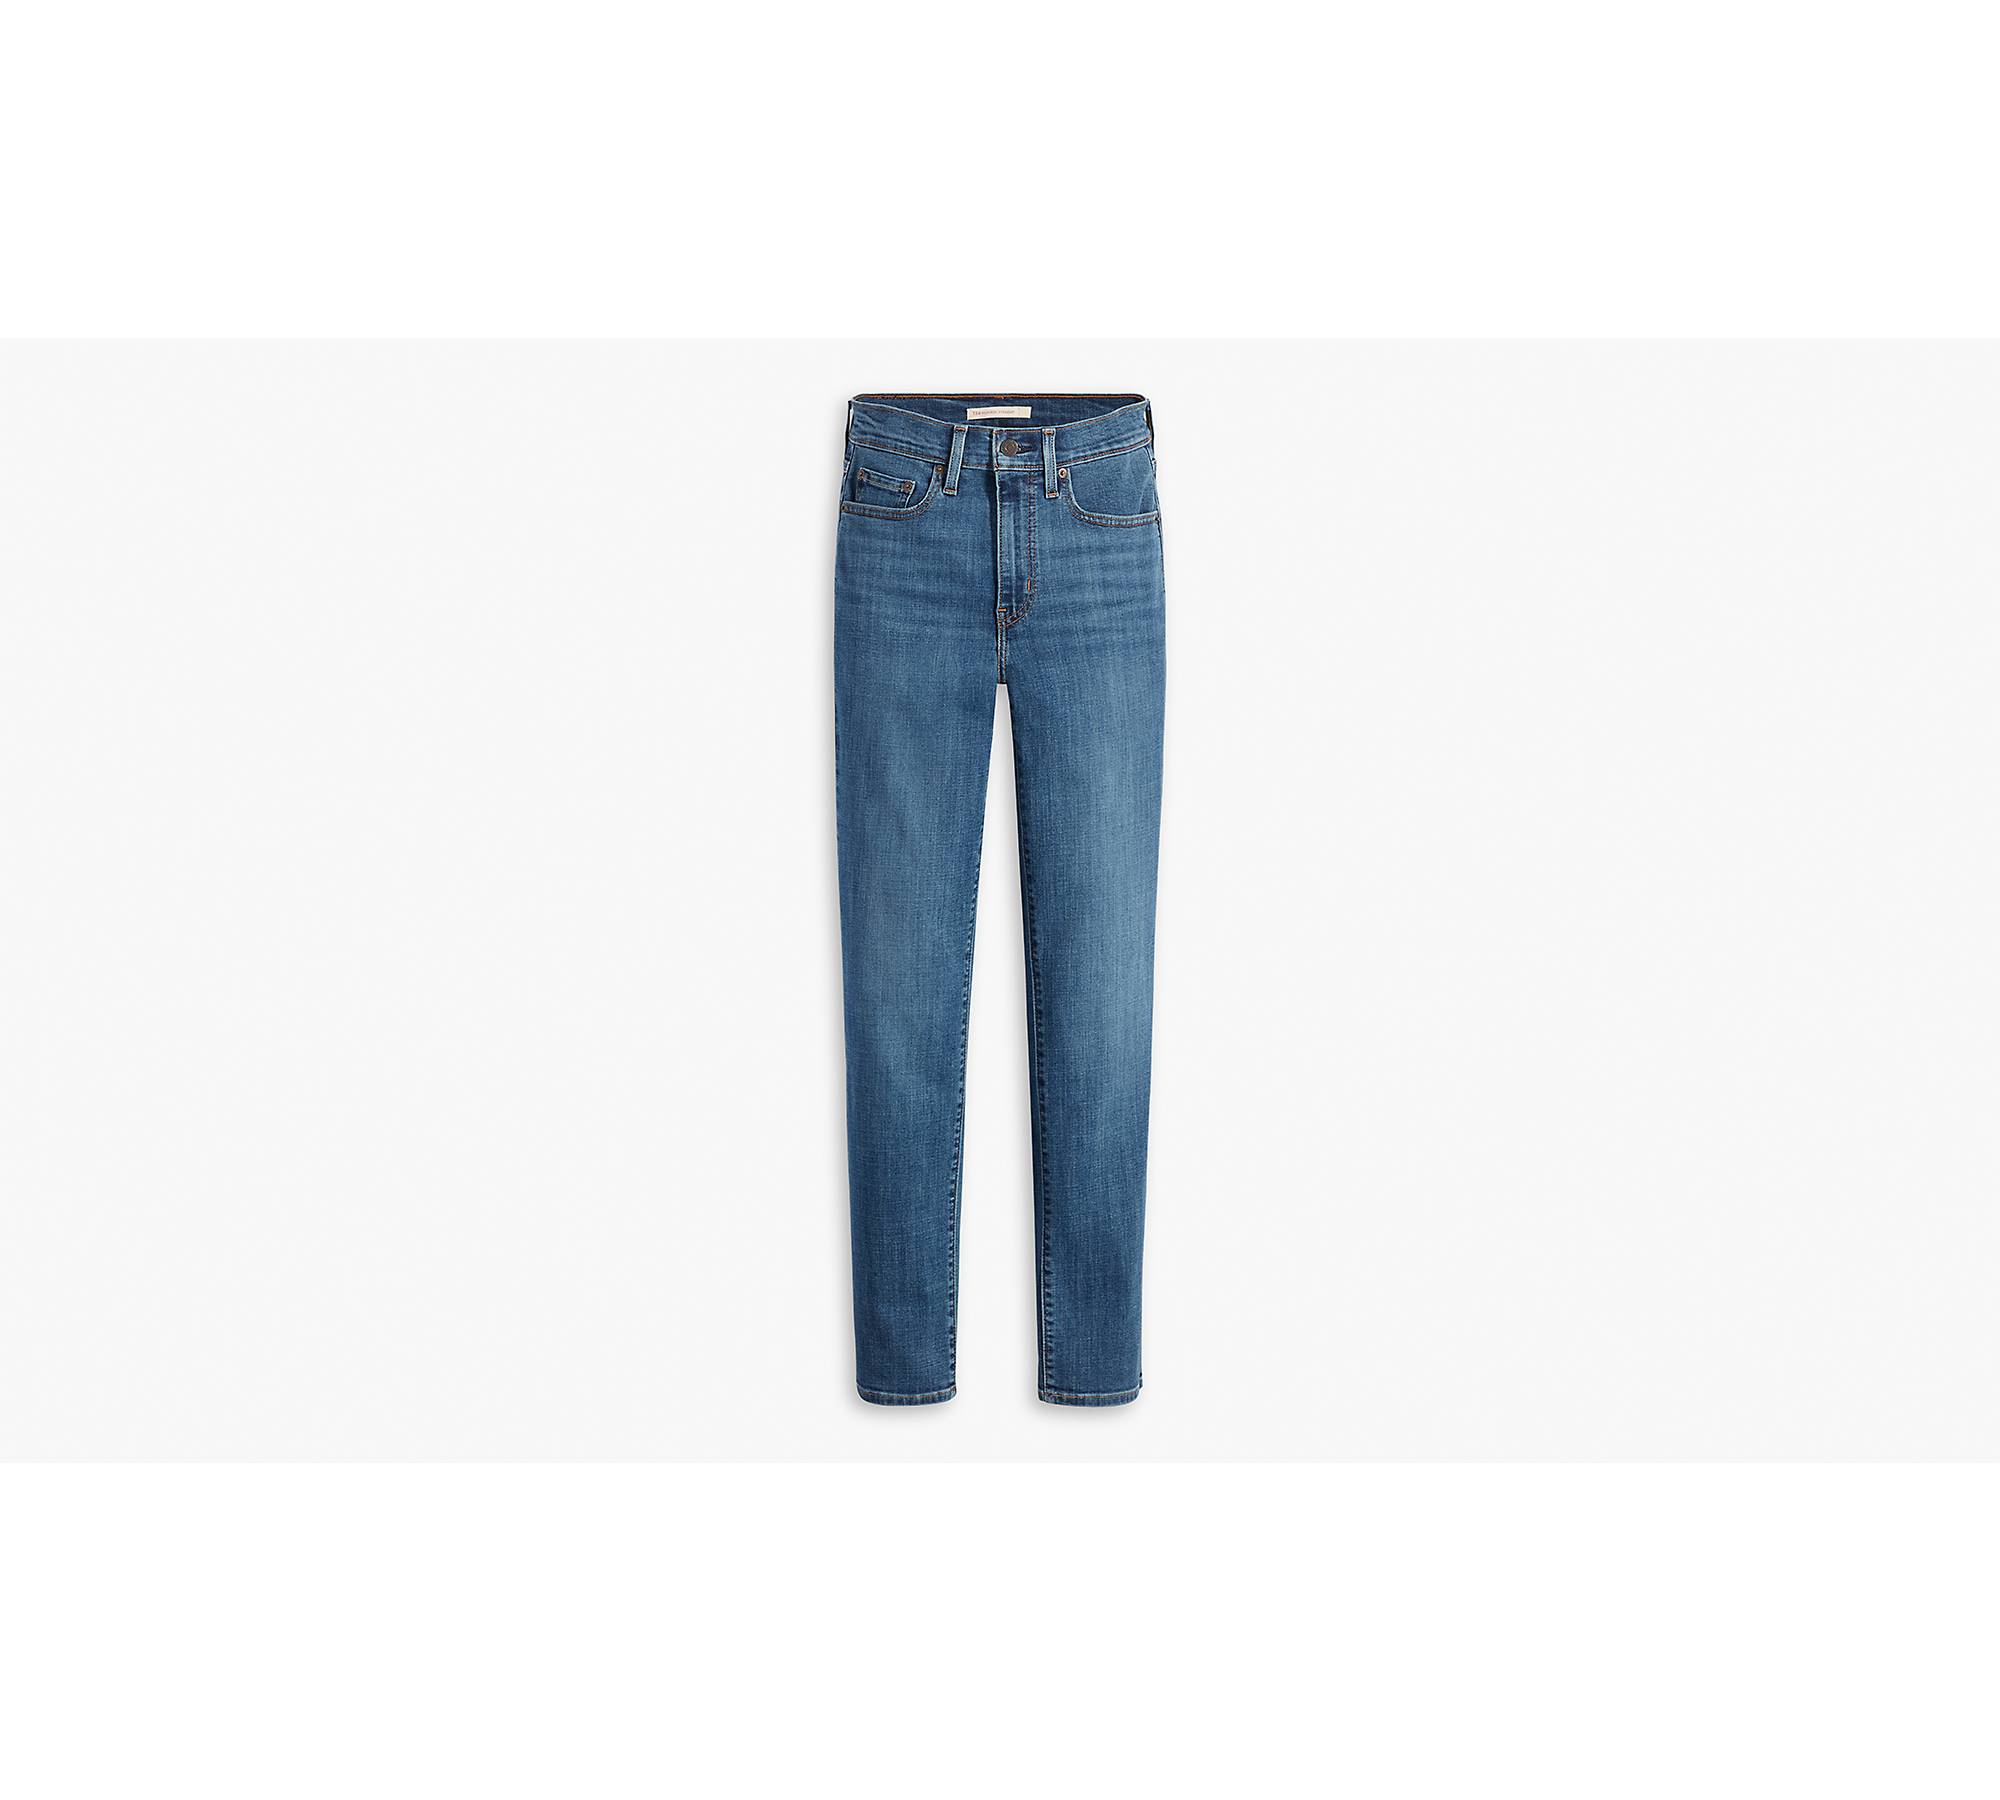 Levi's Women's High Waisted Taper Jeans, 26986-0002 FYI, 24W x 27L :  : Fashion